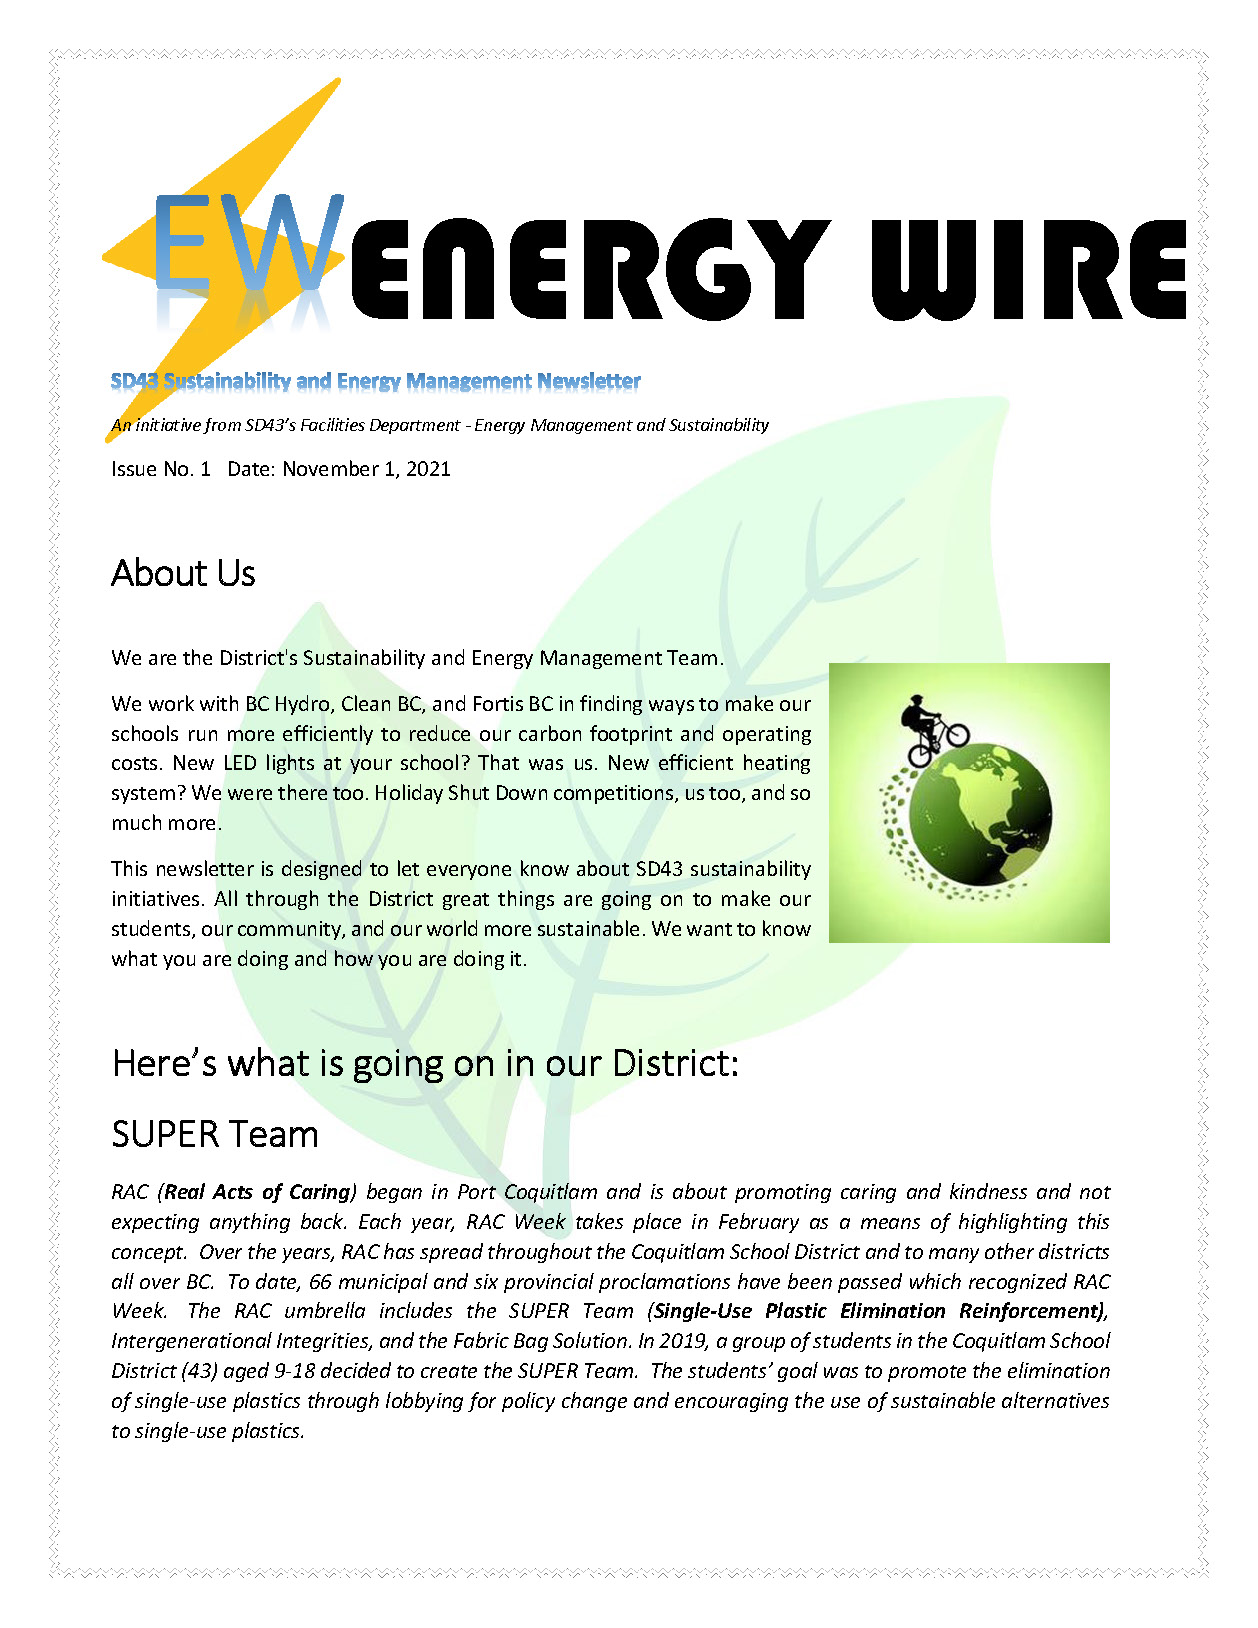 Energy Wire Newsletter final November Final_Page_1.jpg